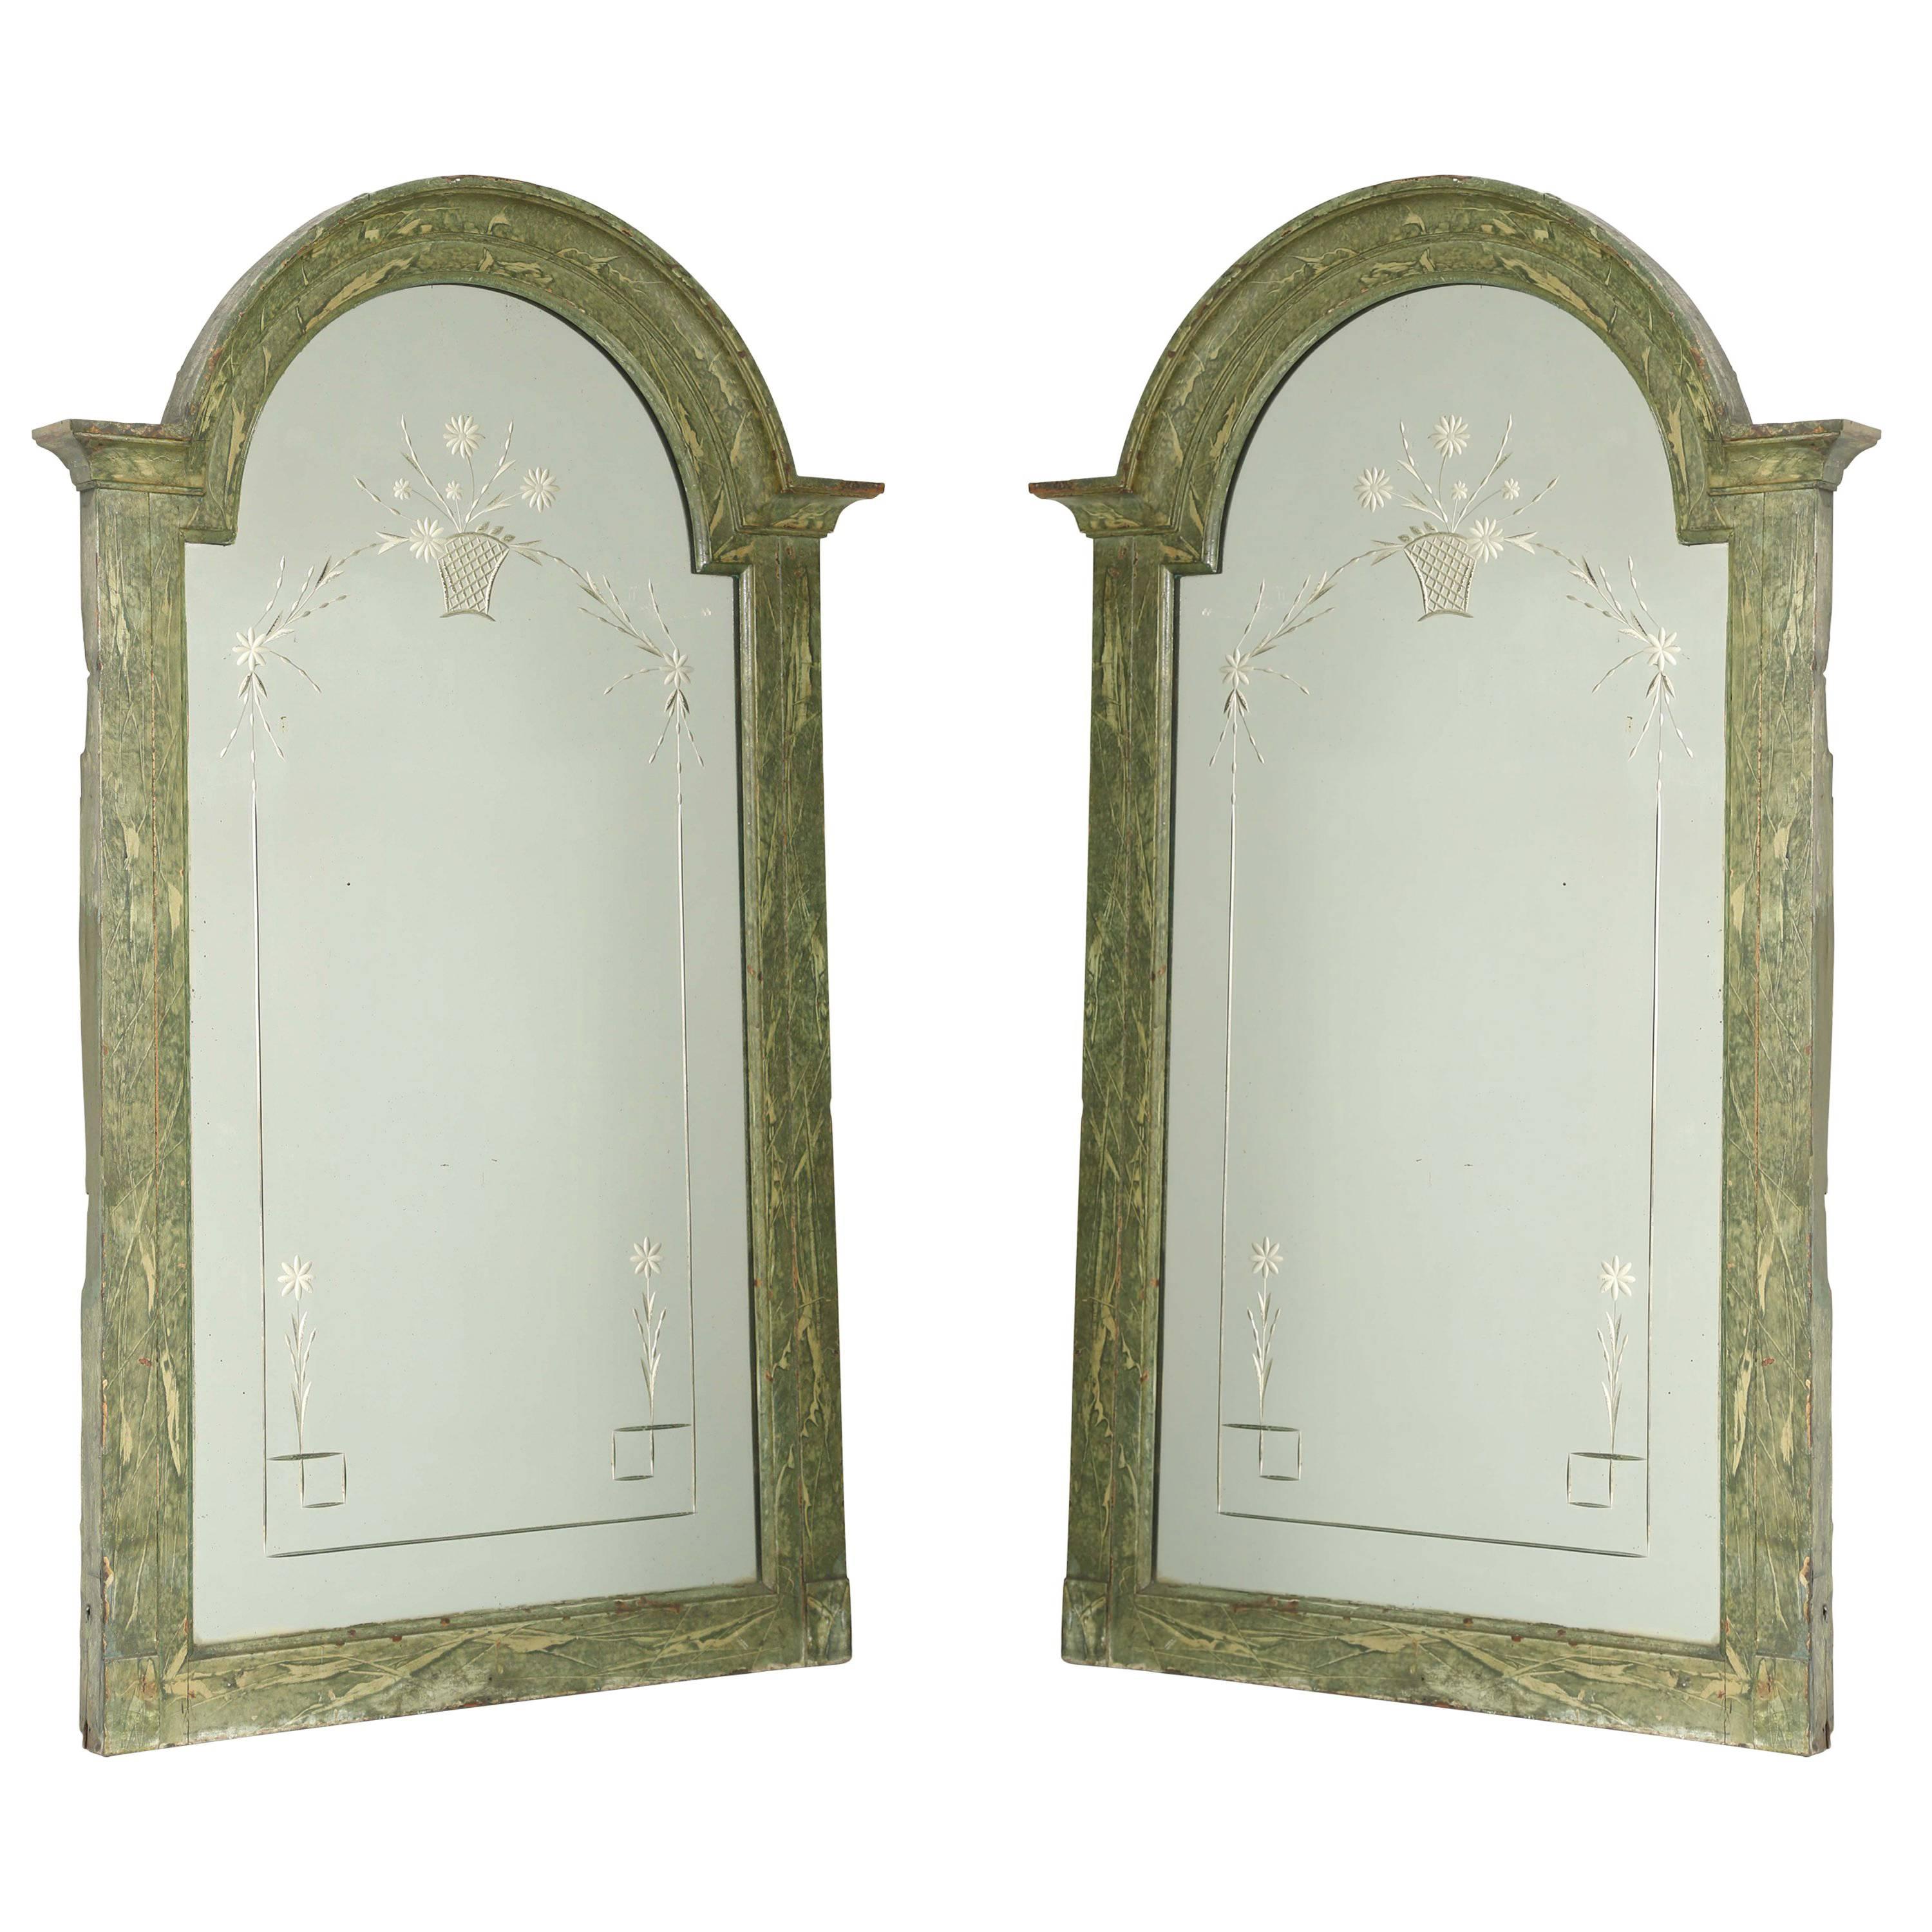 Pair of mirrors, each holding a rectangular mirrorplate with arched top, both etched with flower basket and Meander border, in carved, conforming, frame, with painted finish showing natural wear.

Stock ID D9382